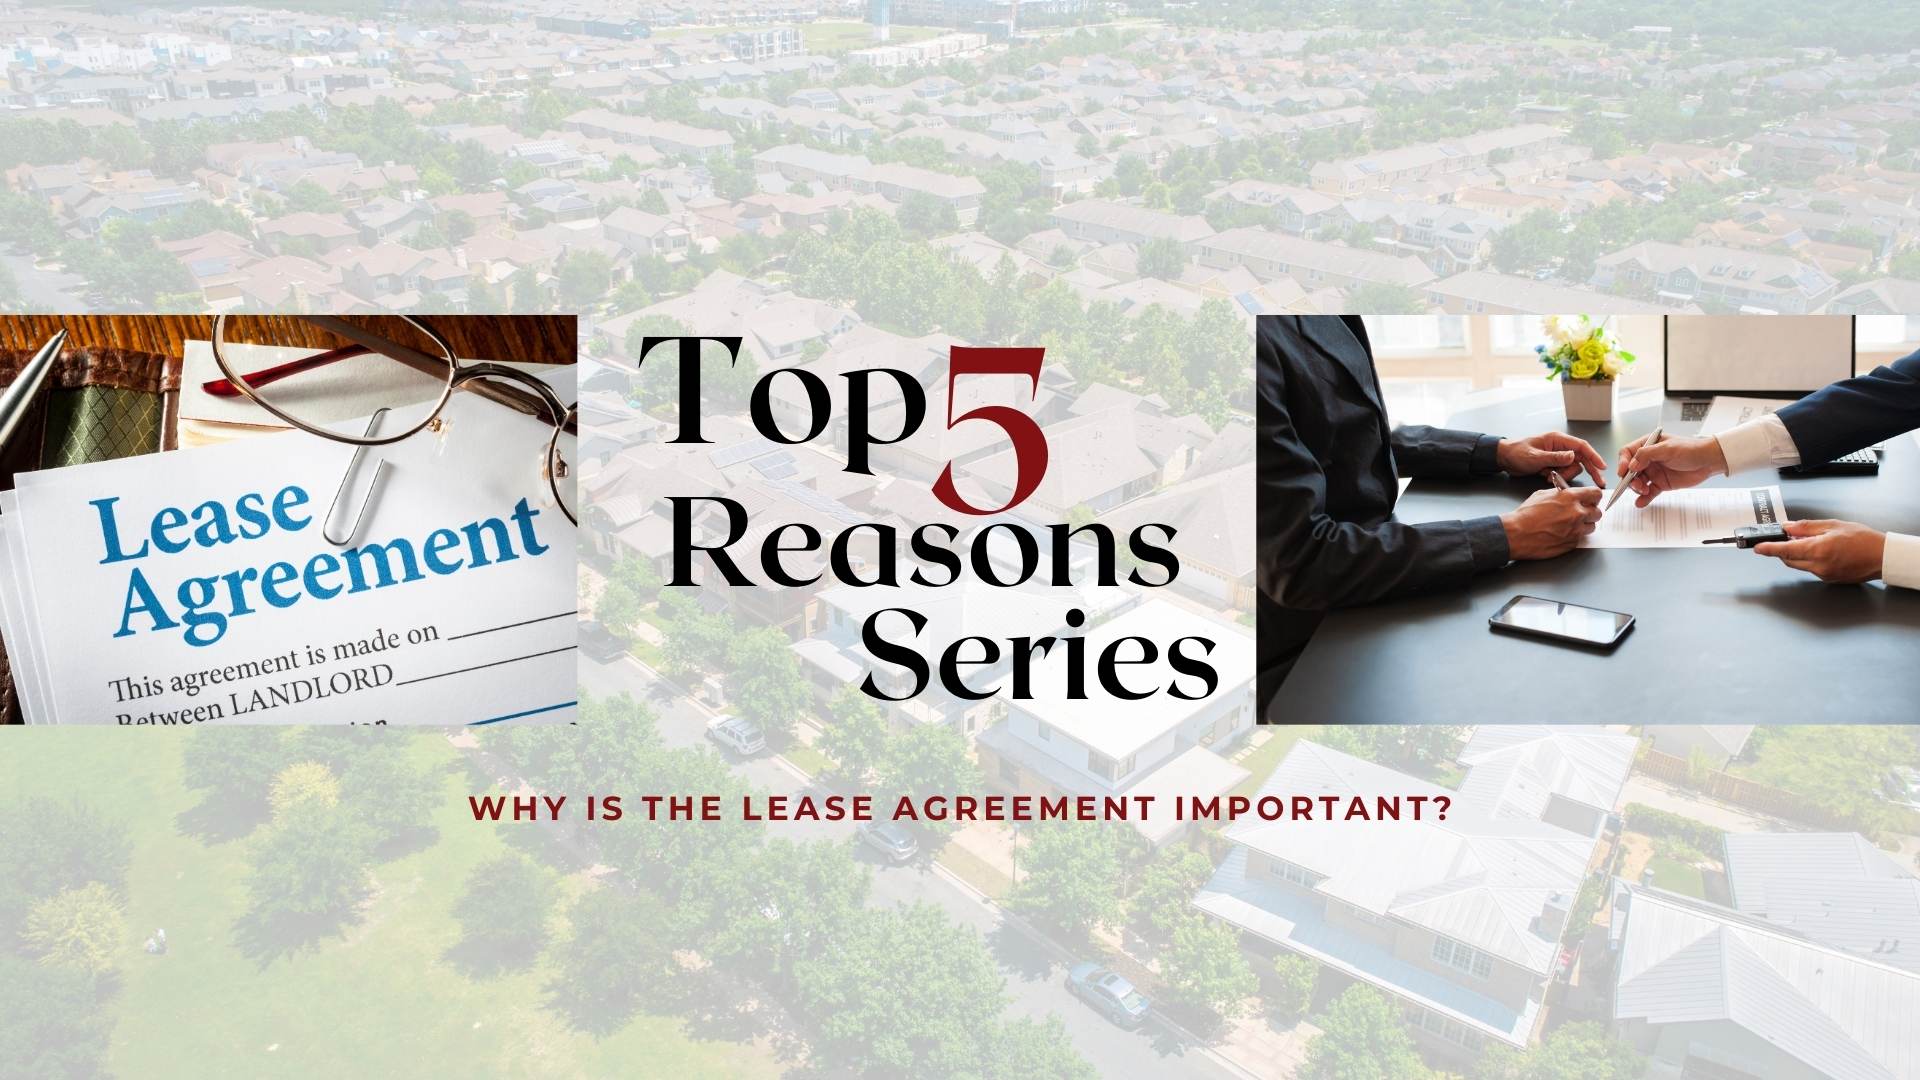 Top 5 Reasons Series: Why is the Lease Agreement Important?